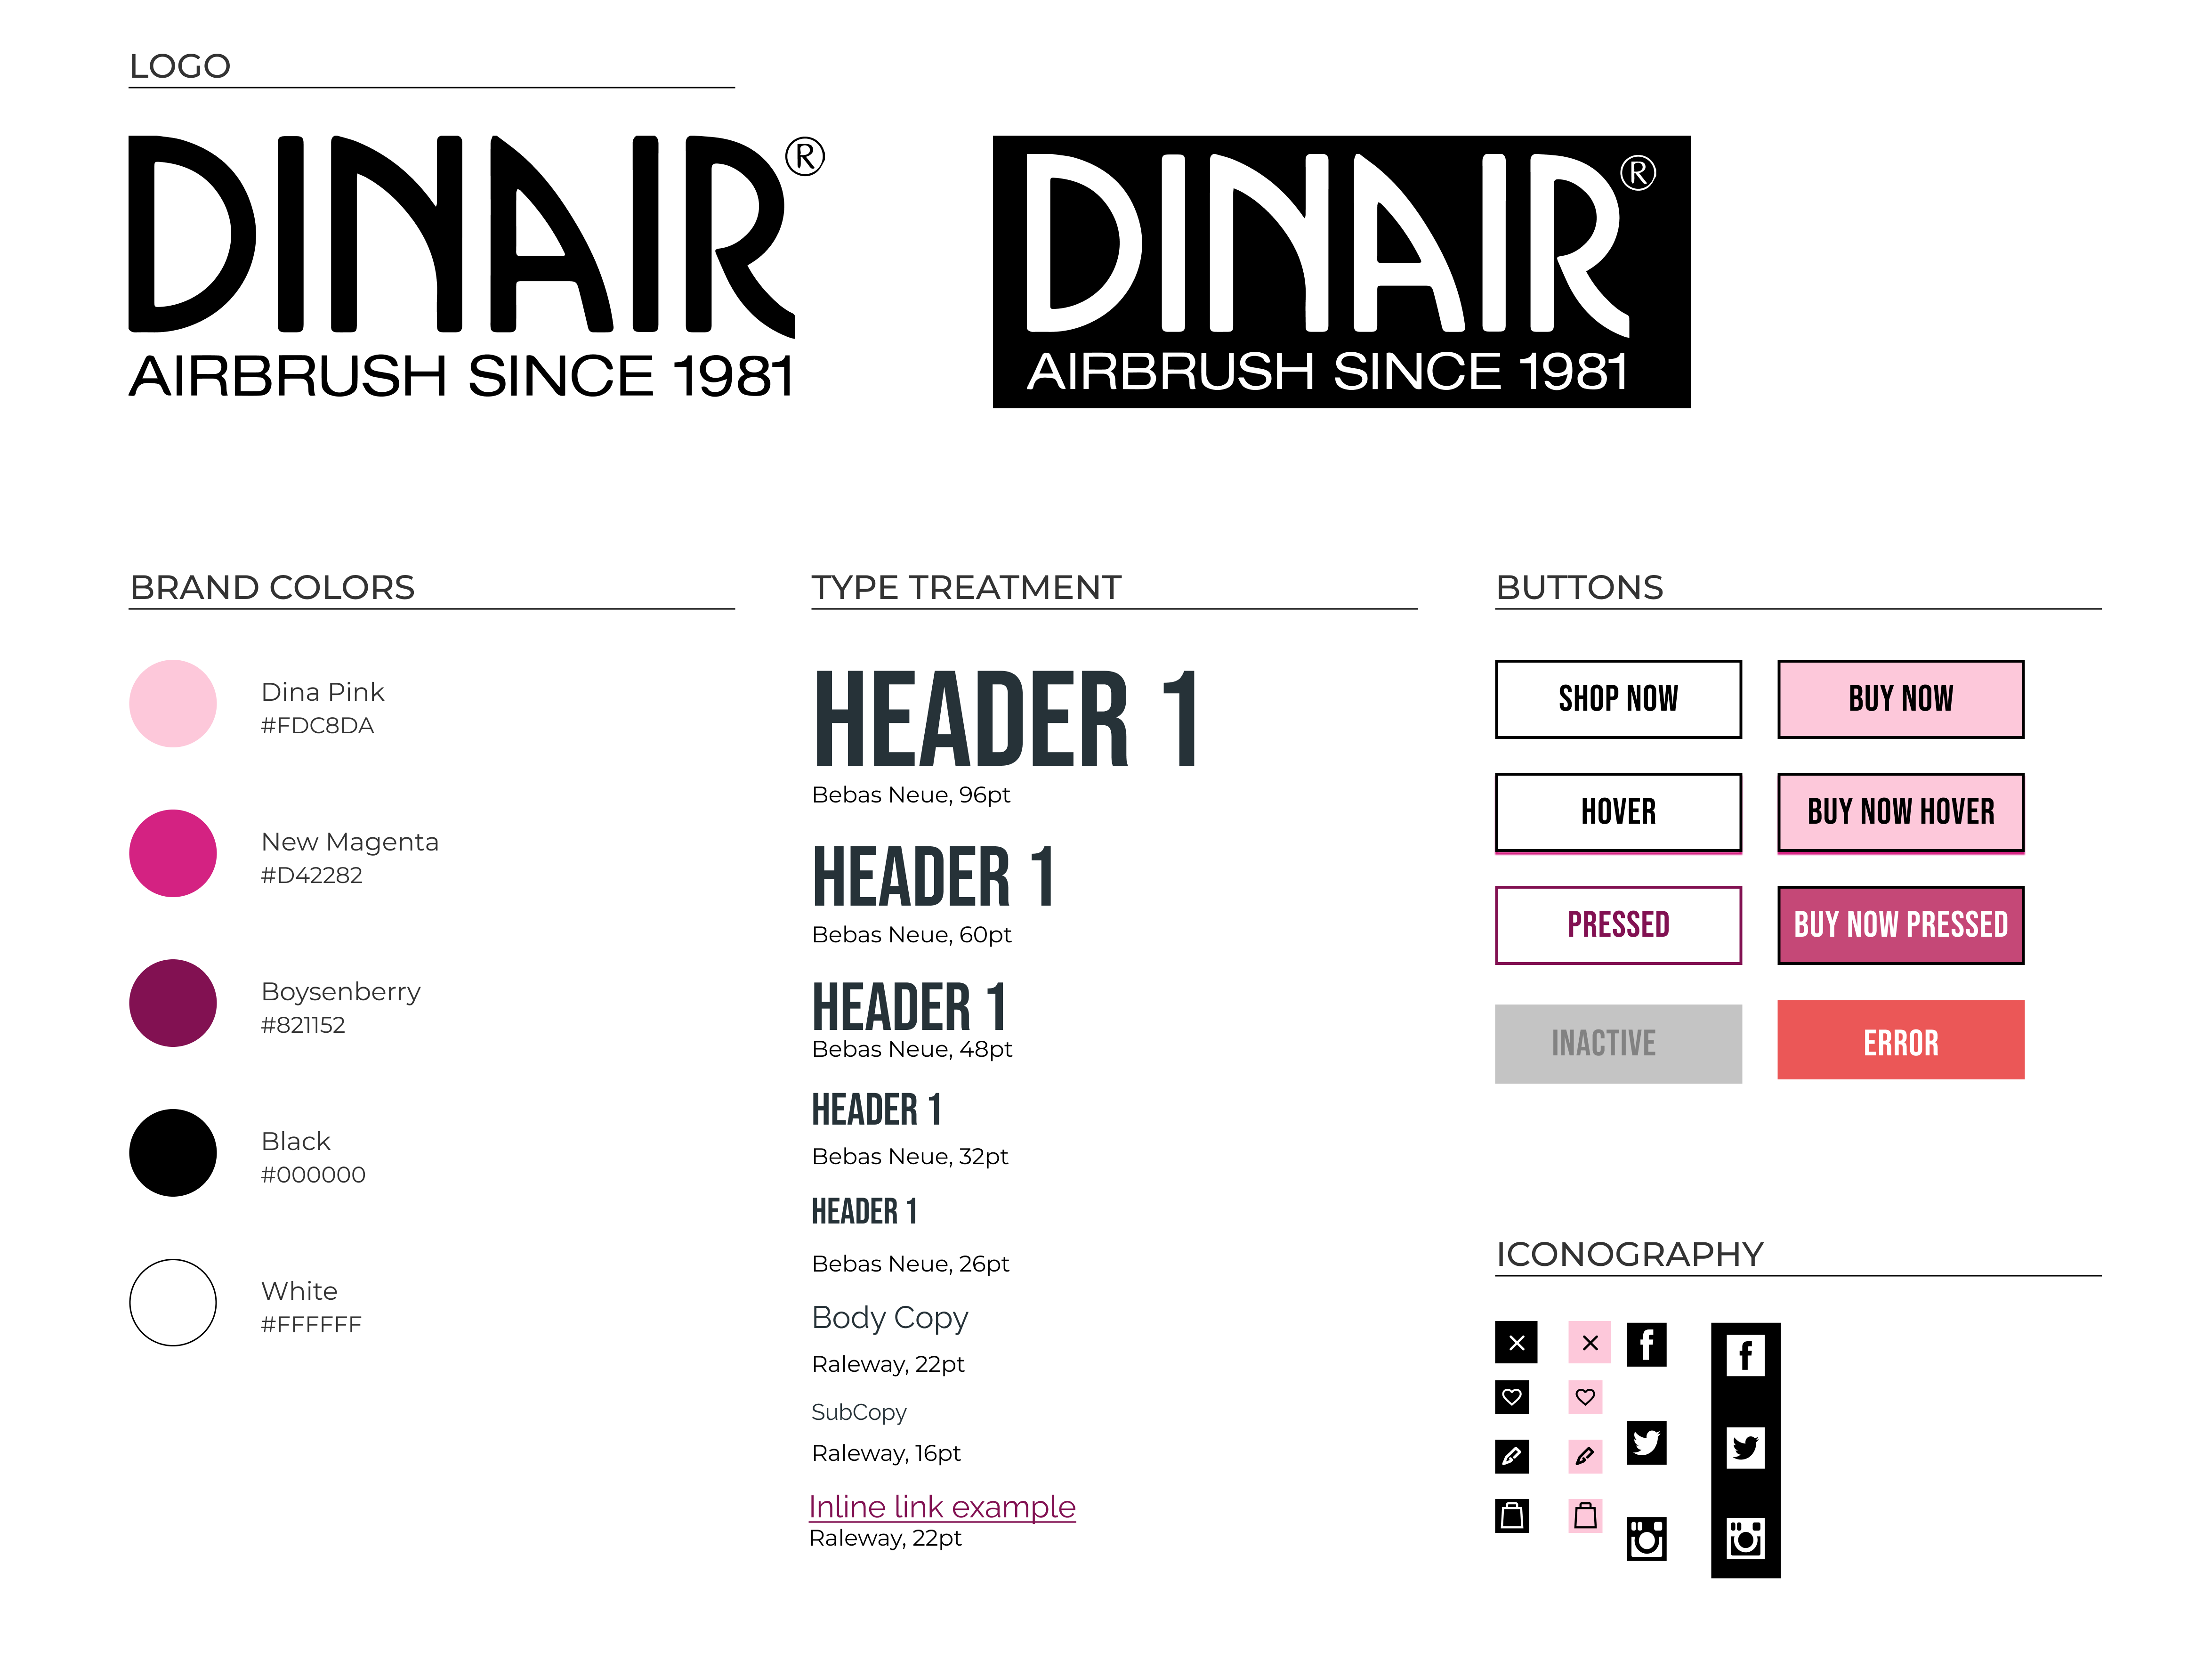 An illustrative image presenting the meticulous style guide for Dinair's Airbrush Makeup, offering a detailed visual reference for brand colors, typography, and design elements.